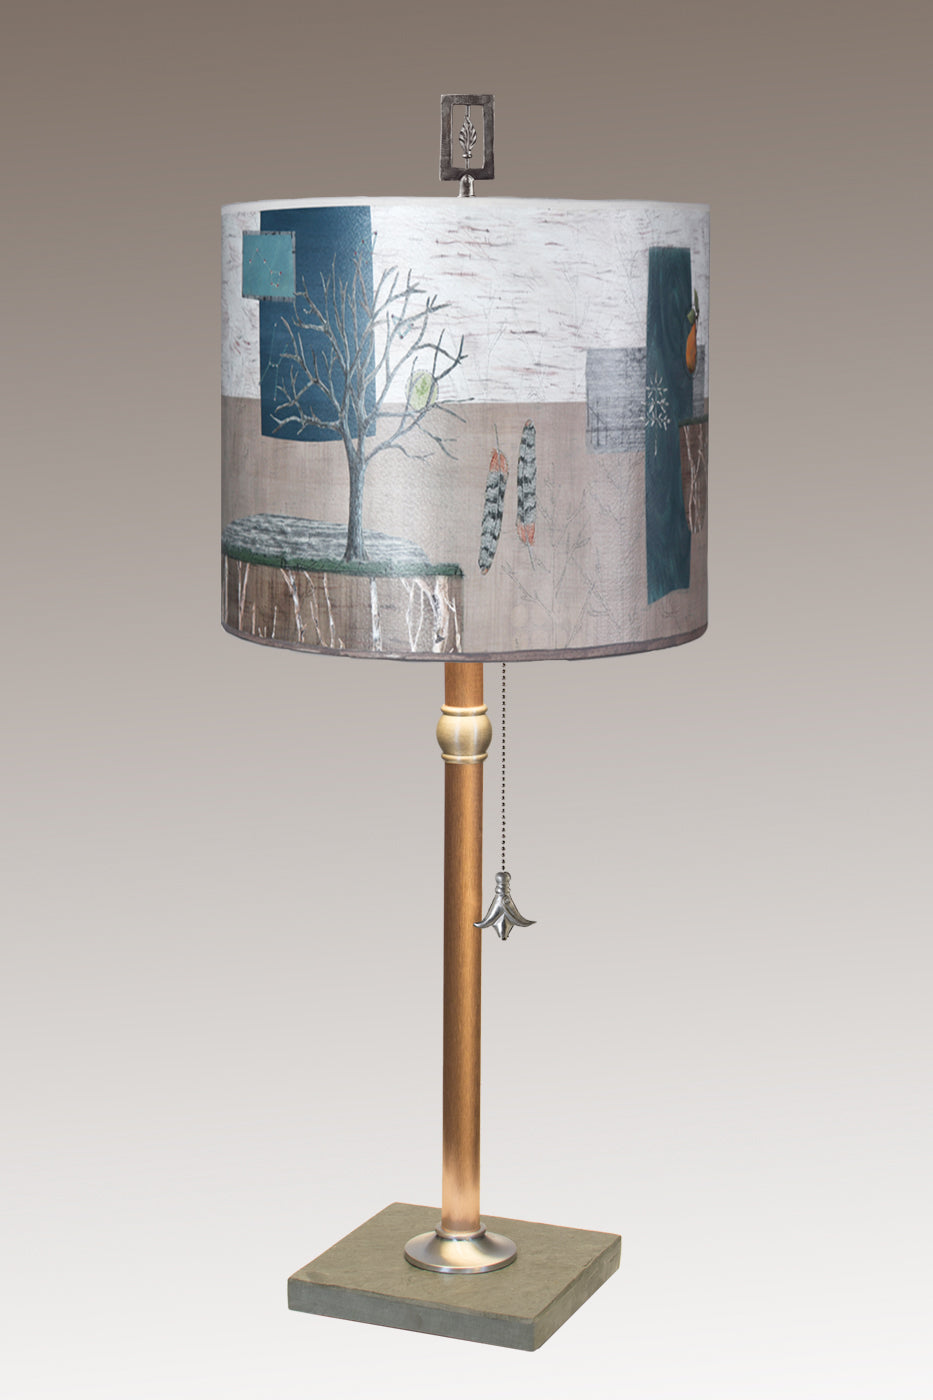 Janna Ugone &amp; Co Table Lamps Copper Table Lamp with Medium Drum Shade in Wander in Drift